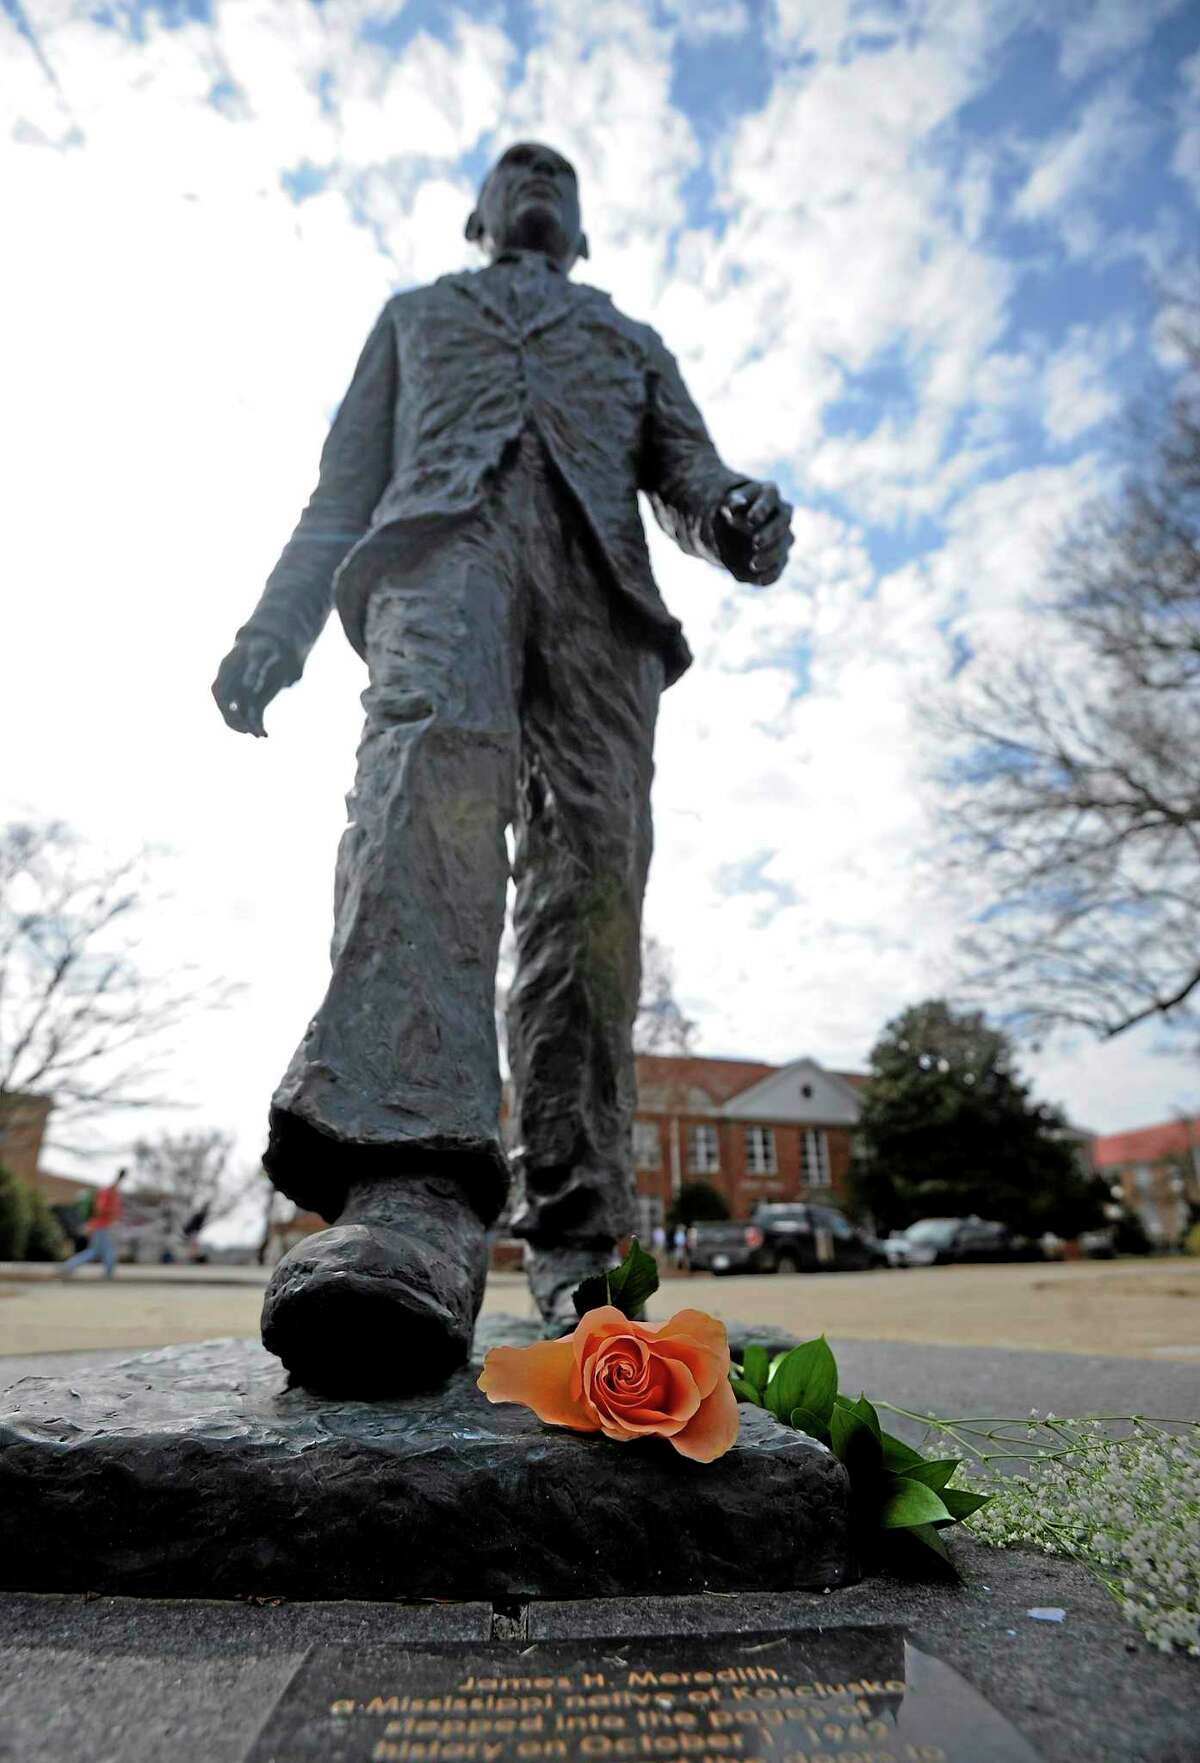 A flower is seen on the James Meredith statue at the University of Mississippi in Oxford, Miss., Tuesday, Feb. 18, 2014. Campus police at the University of Mississippi are checking video surveillance footage in the area around a statue of James Meredith that was found sullied Sunday morning. (AP Photo/The Daily Mississippian, Thomas Graning)